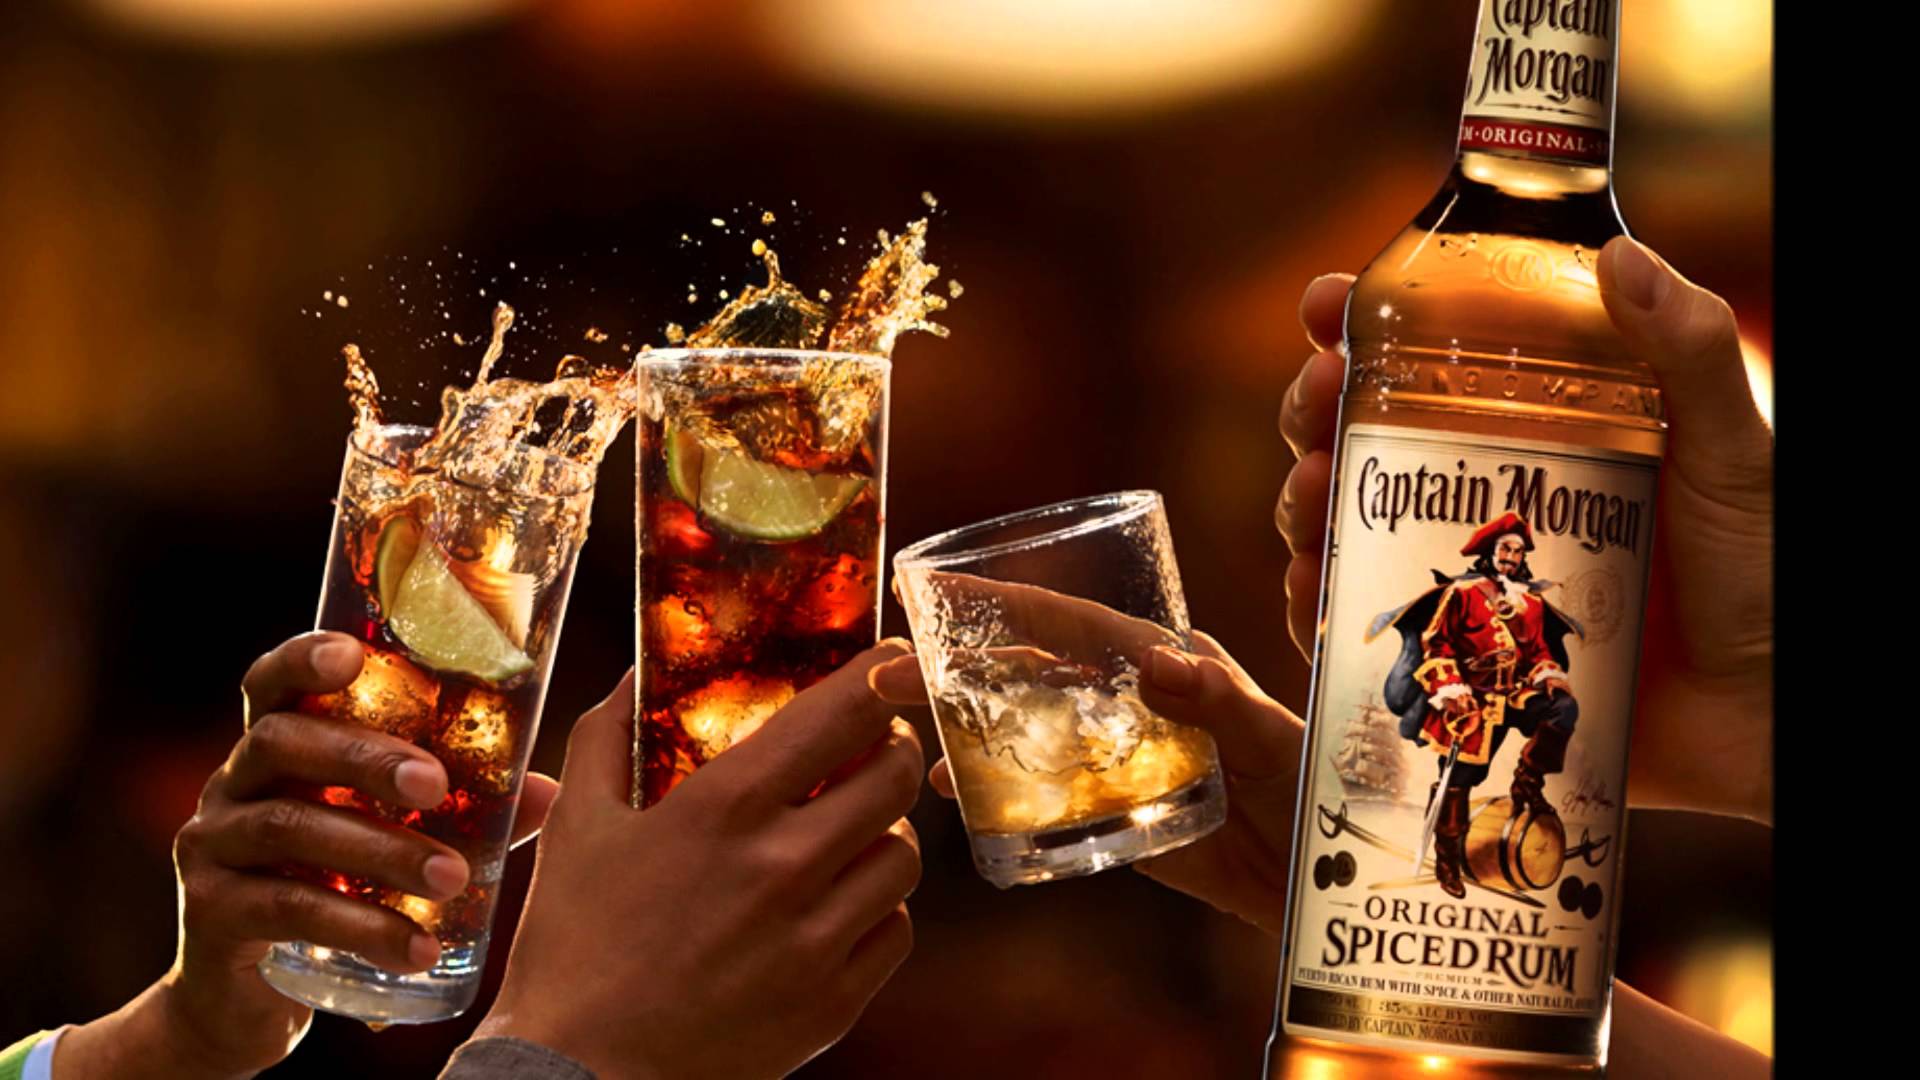 Captain Morgan High Quality Background on Wallpapers Vista